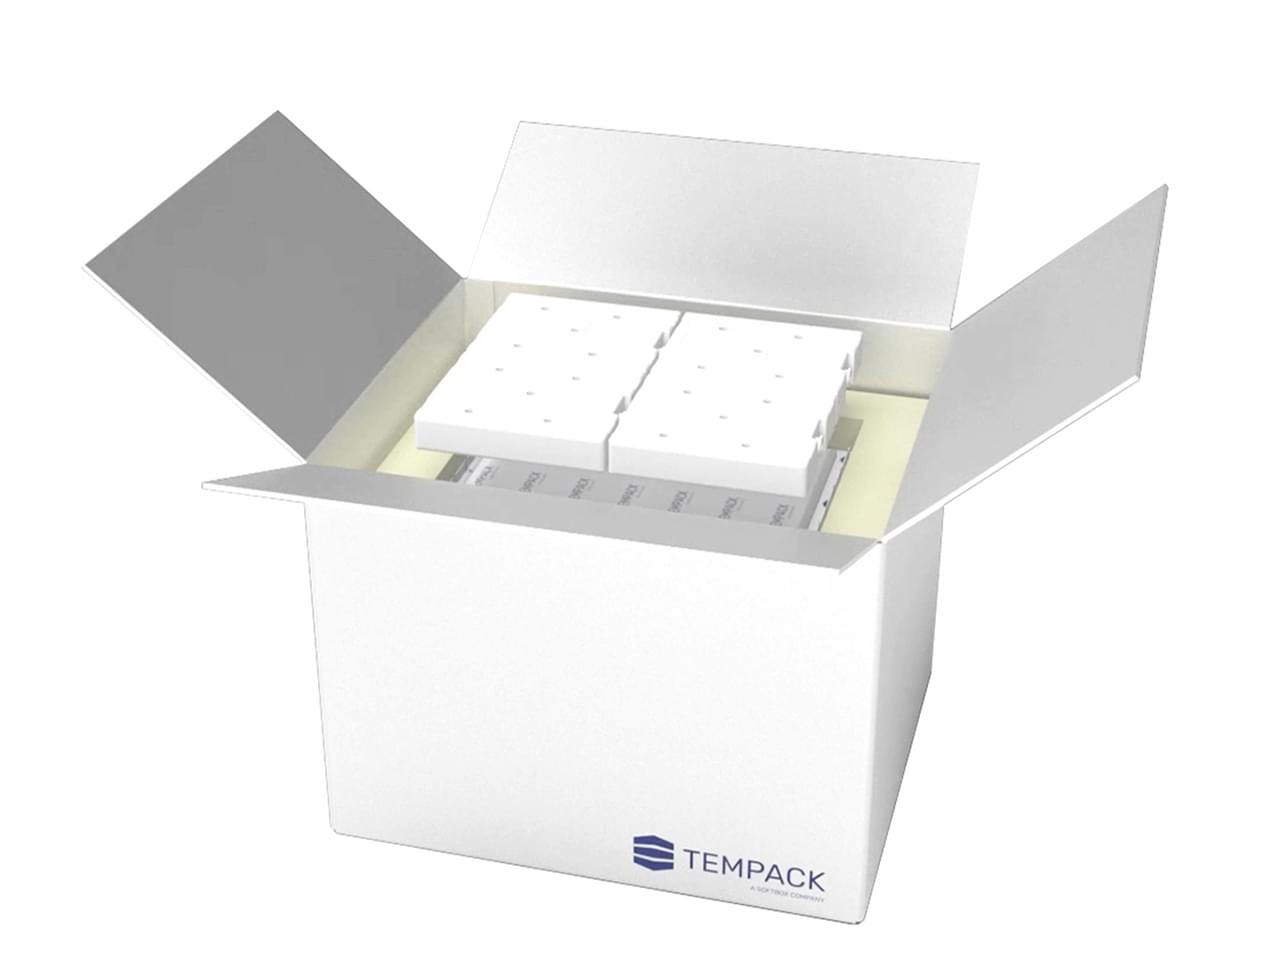 tempack-prequalified-solutions-biotech-72-2@2x-1280x958